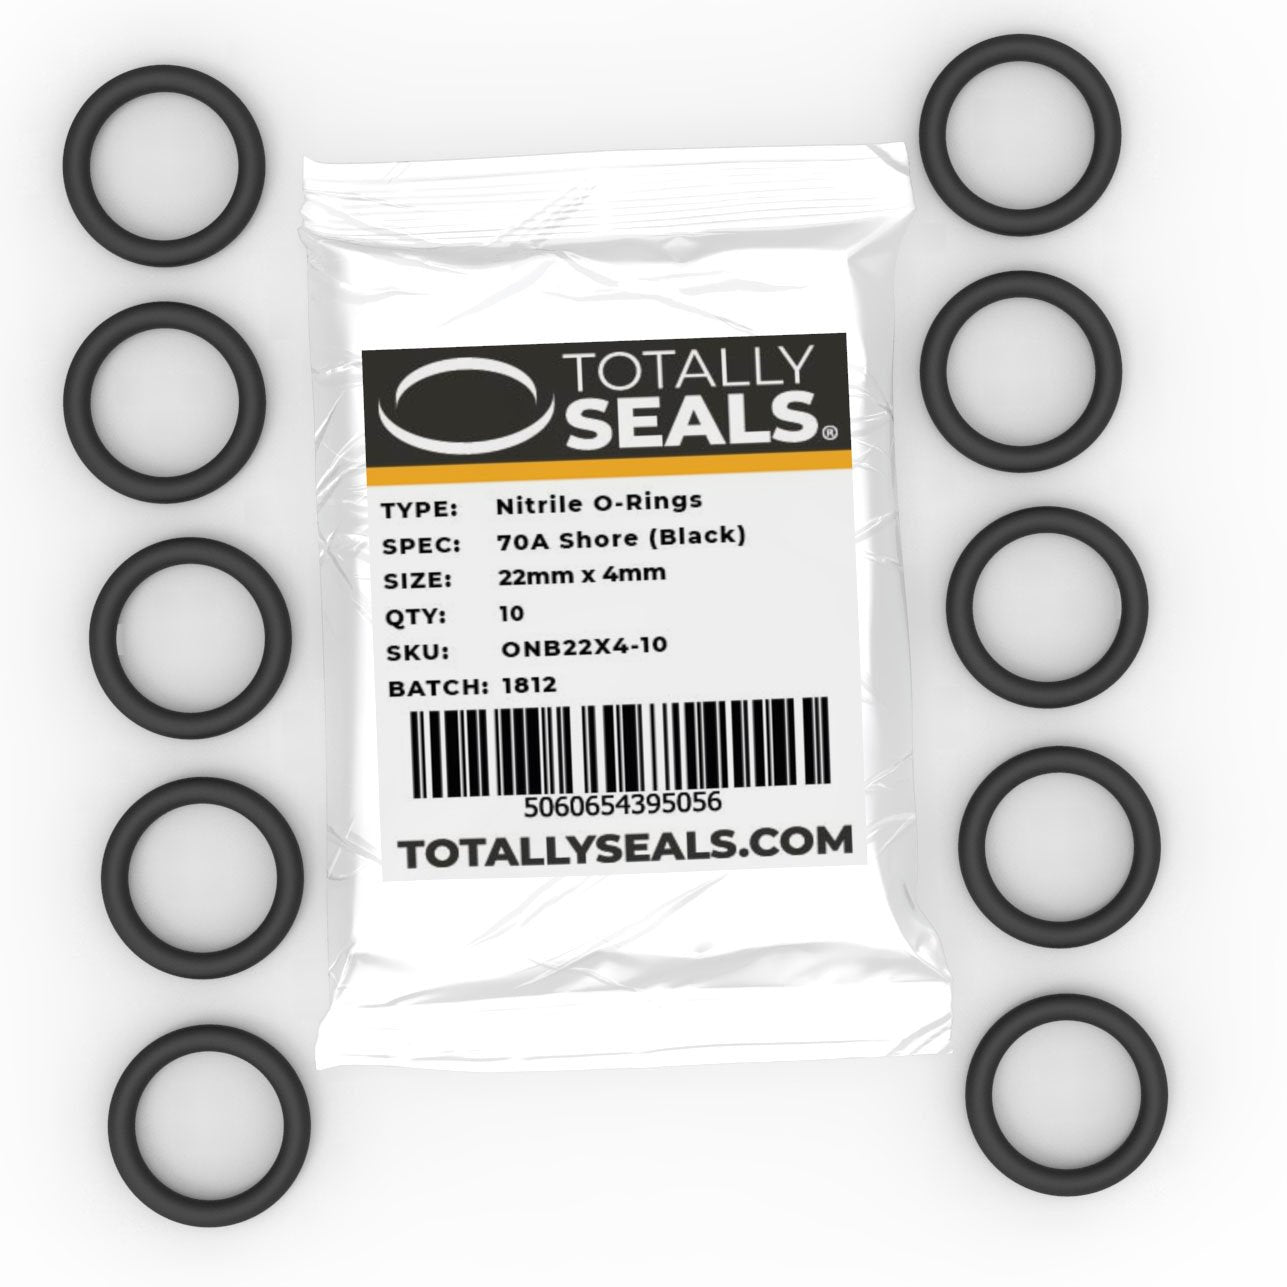 22mm x 4mm (30mm OD) Nitrile O-Rings - Totally Seals®